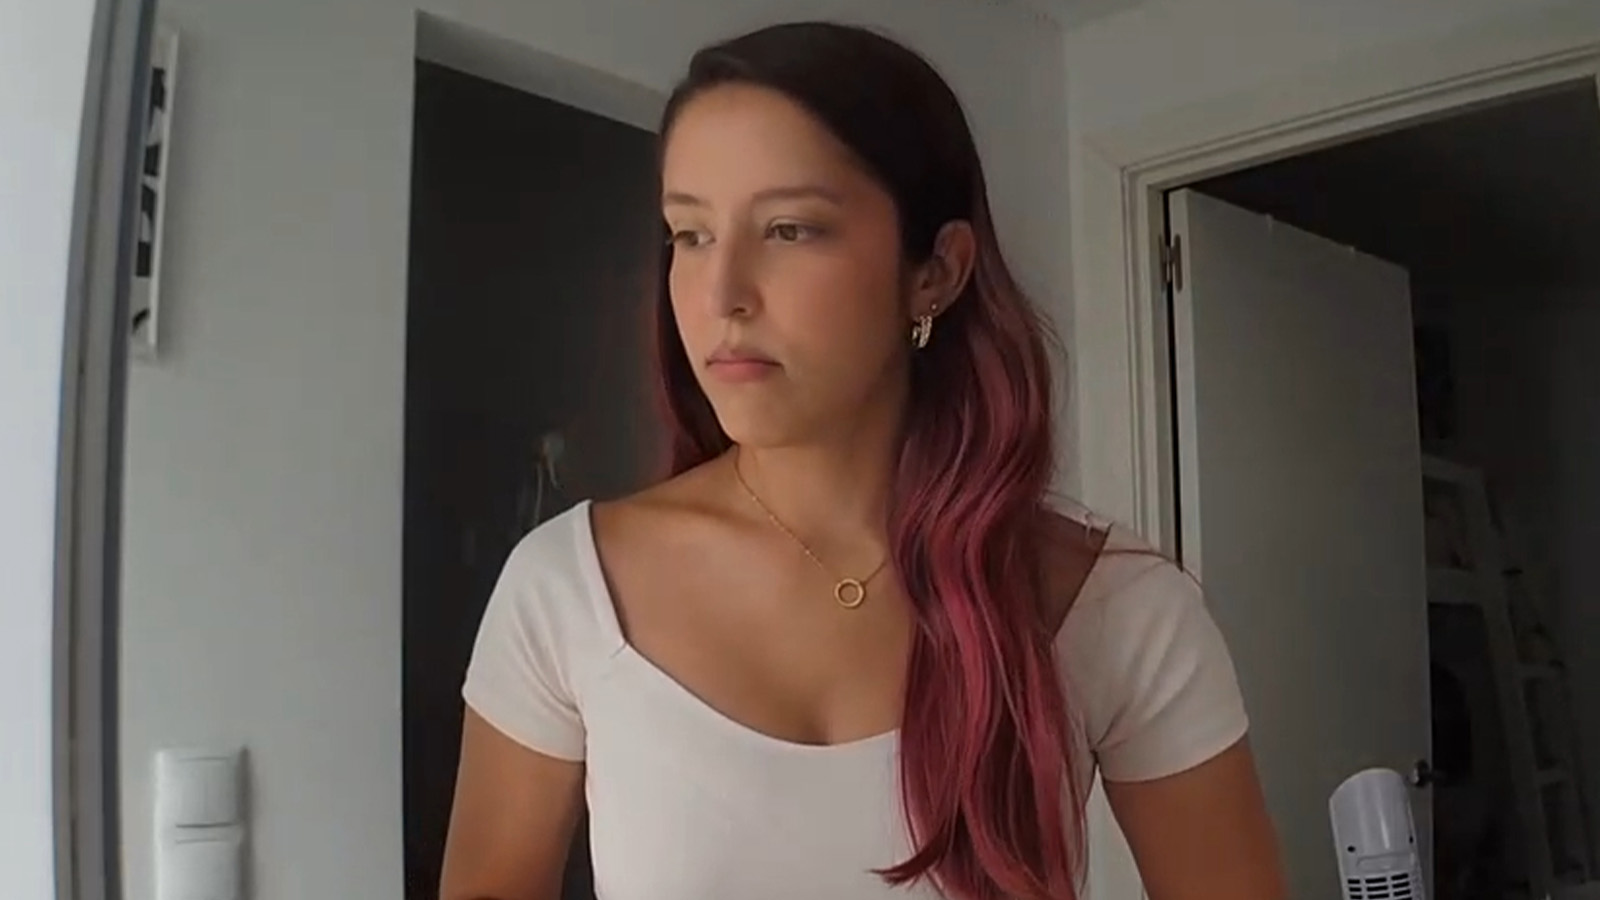 Twitch streamer breaks down after VOD reveals man broke into her house